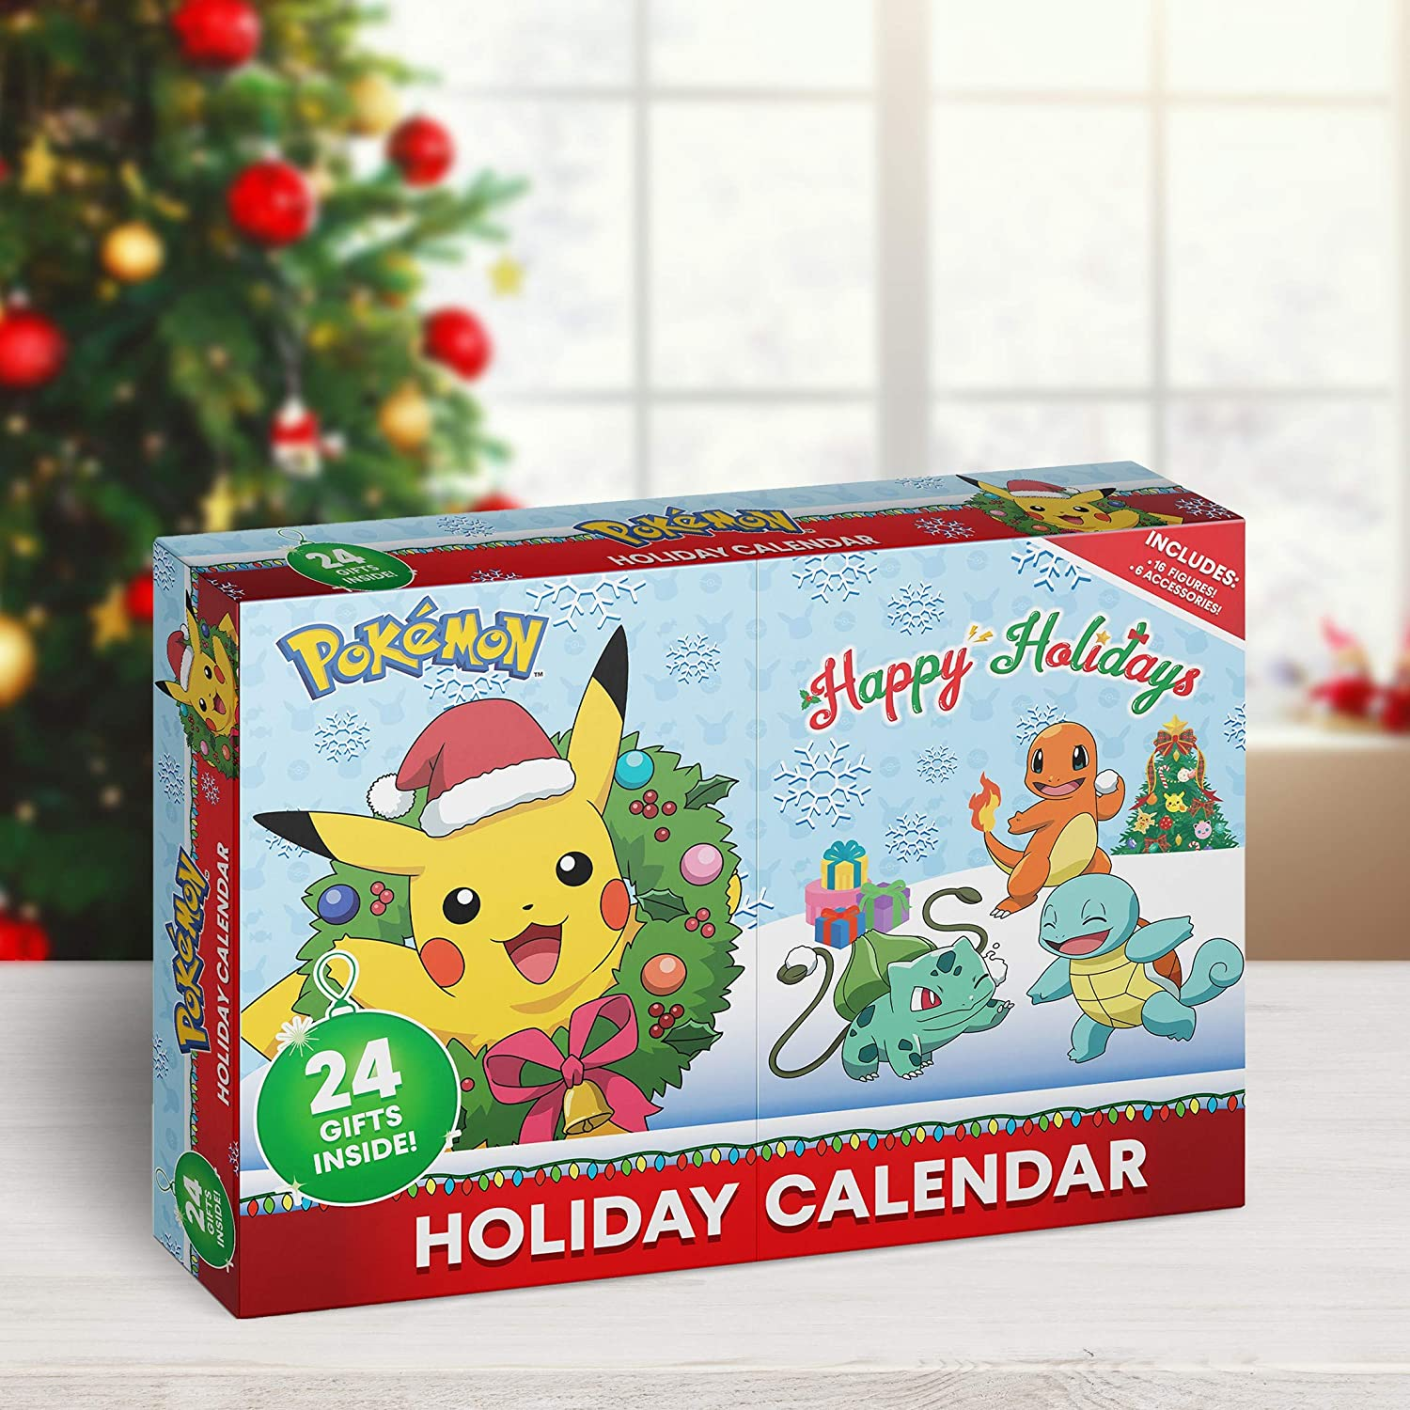 Pokemon Advent Calendar Reviews: Get All The Details At Hello Subscription